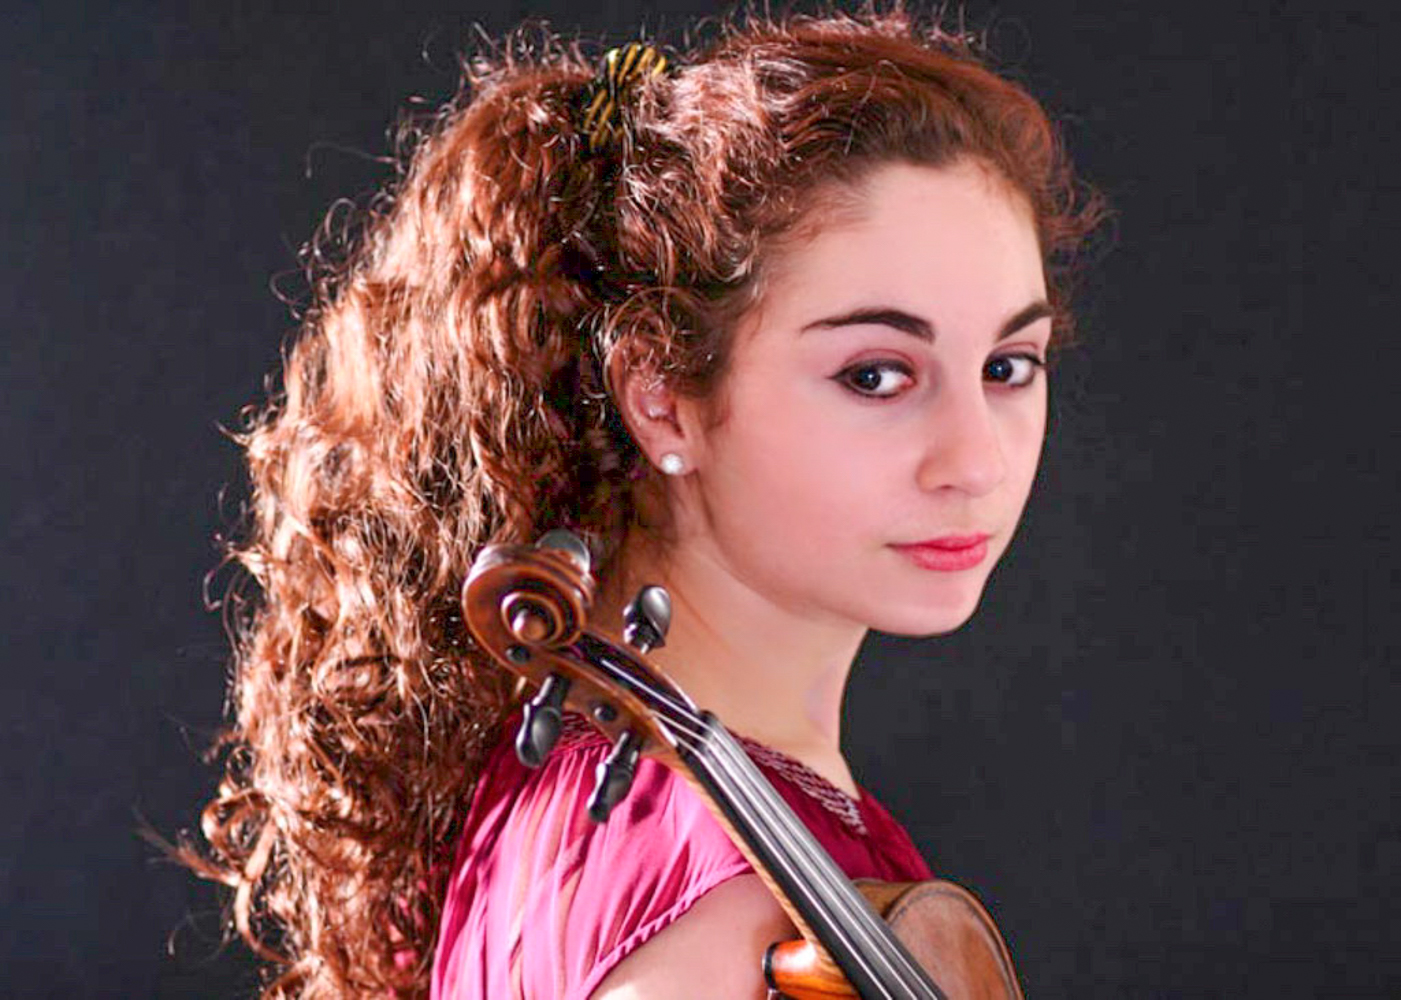 Headshot of young lady with long curly brown hair holding violin